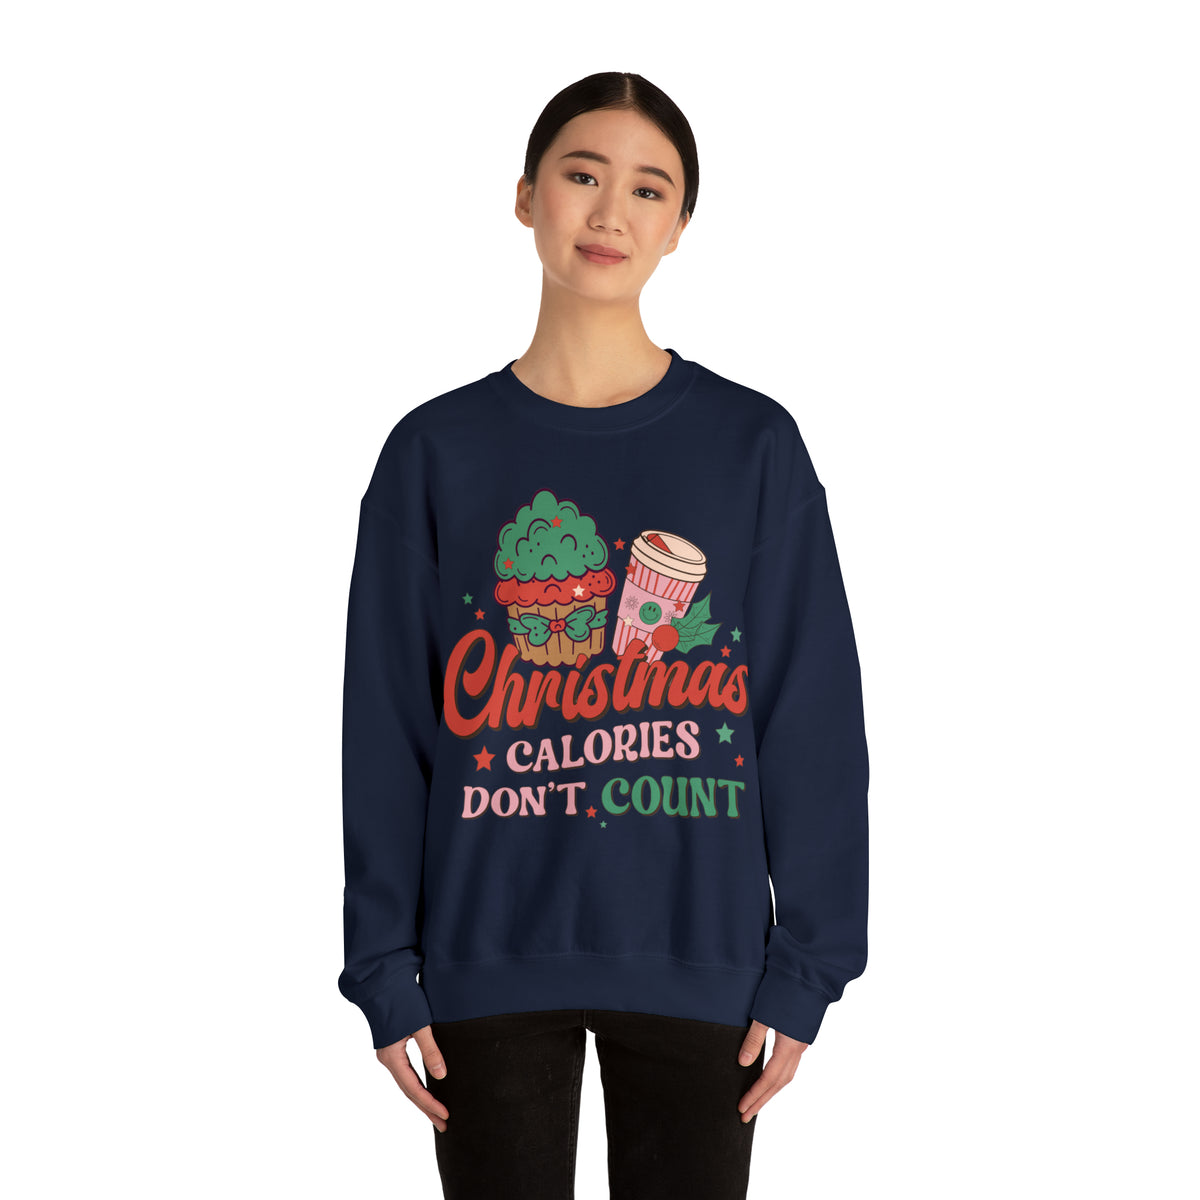 Christmas Sweatshirt, Christmas Sweater, Christmas Party Outfit, Holiday Gifts, Funny Christmas Sweater, Ugly Sweater, Holiday Sweatshirt